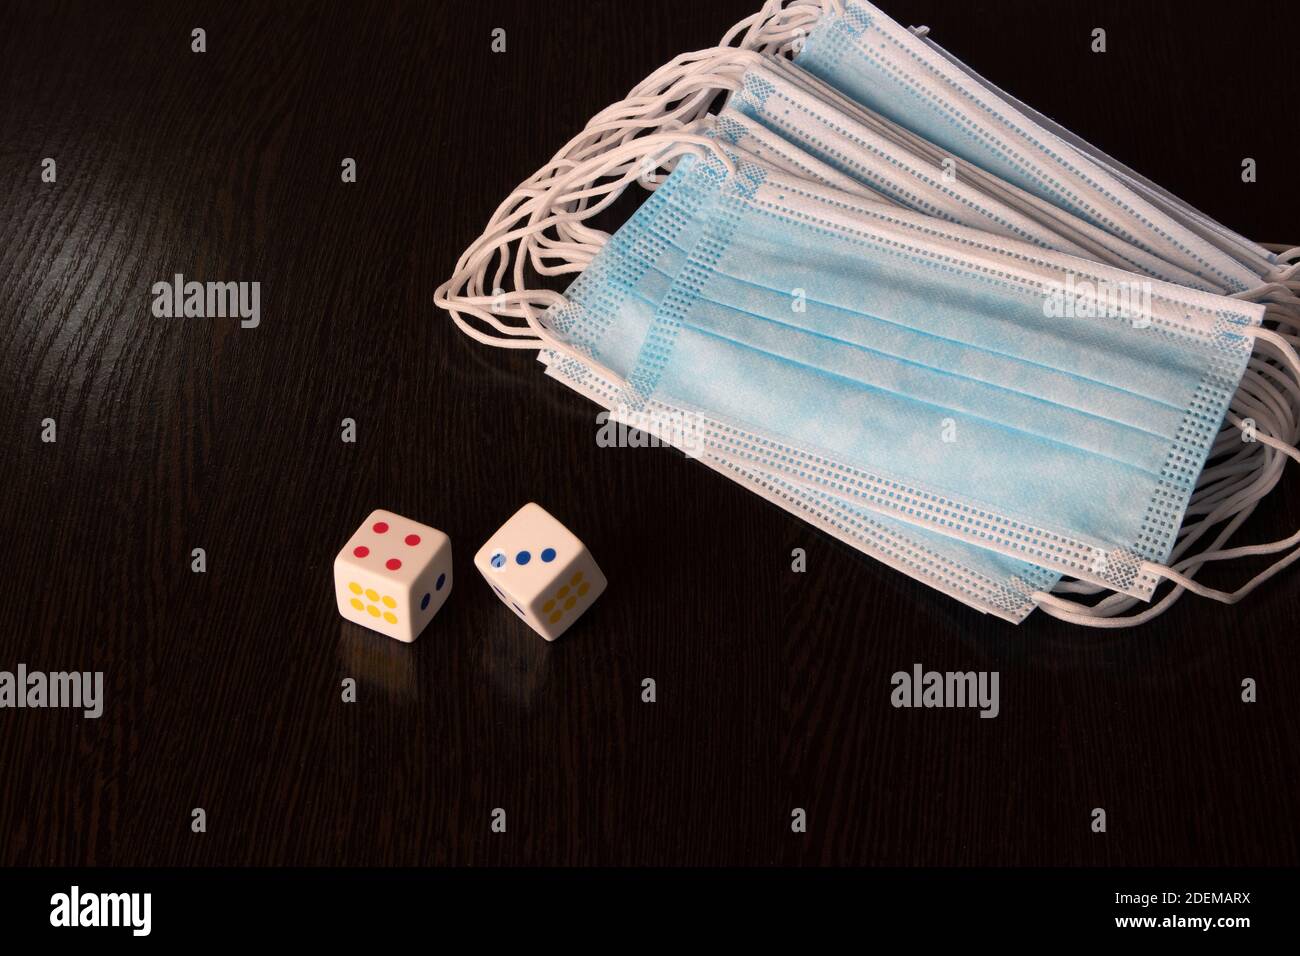 Pack of medical protective face masks and two dices lying on a dark wooden surface Stock Photo